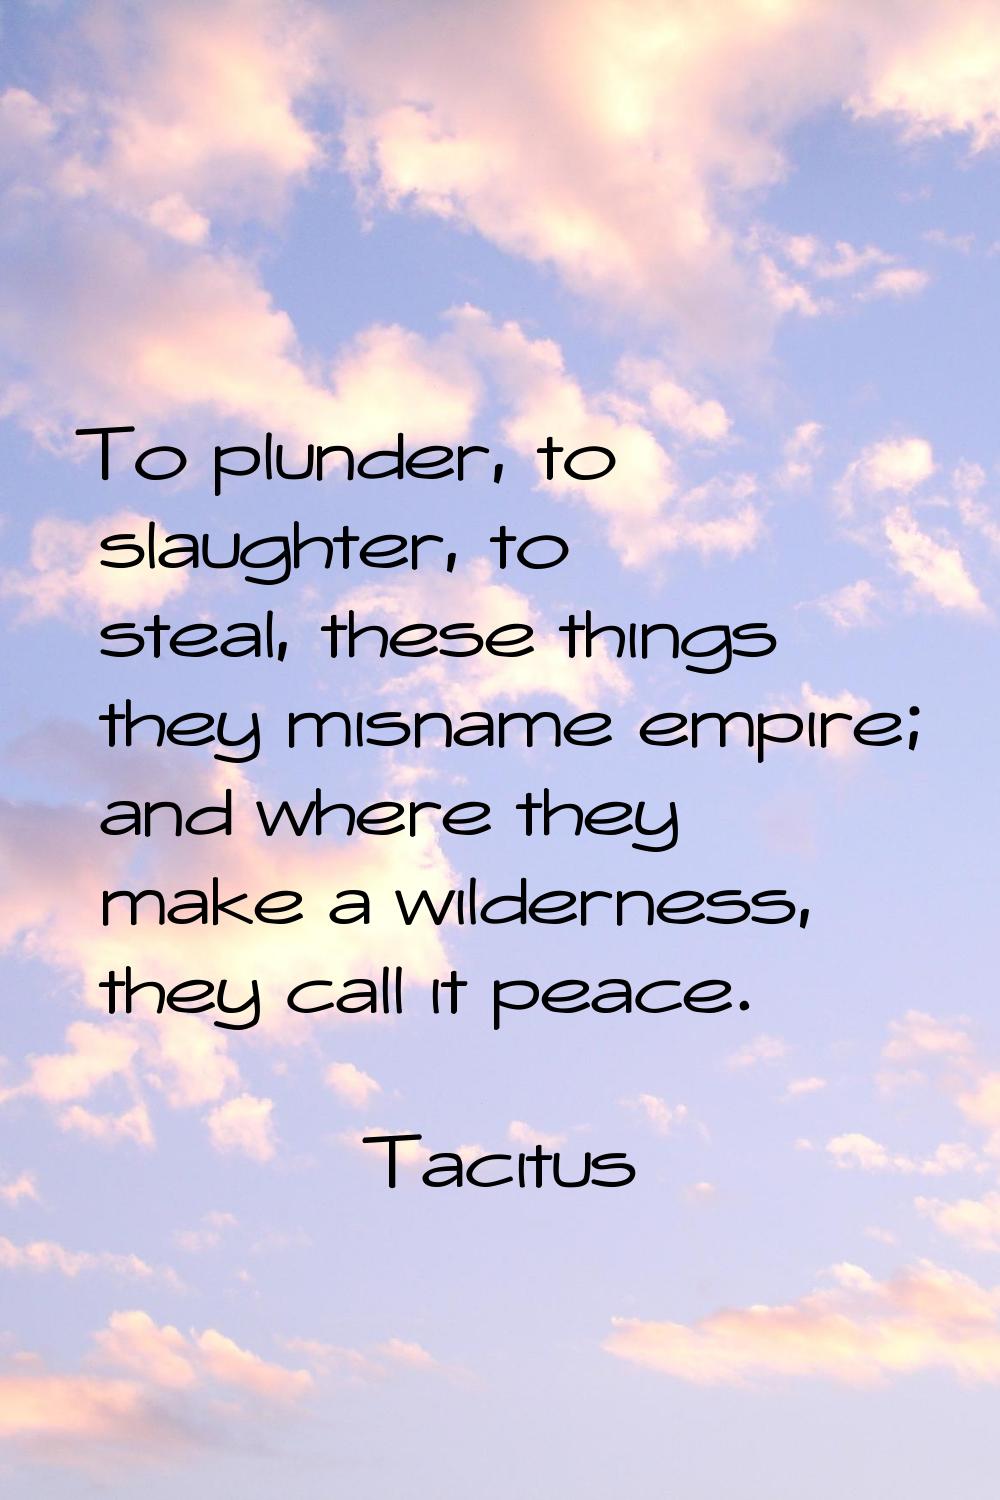 To plunder, to slaughter, to steal, these things they misname empire; and where they make a wildern